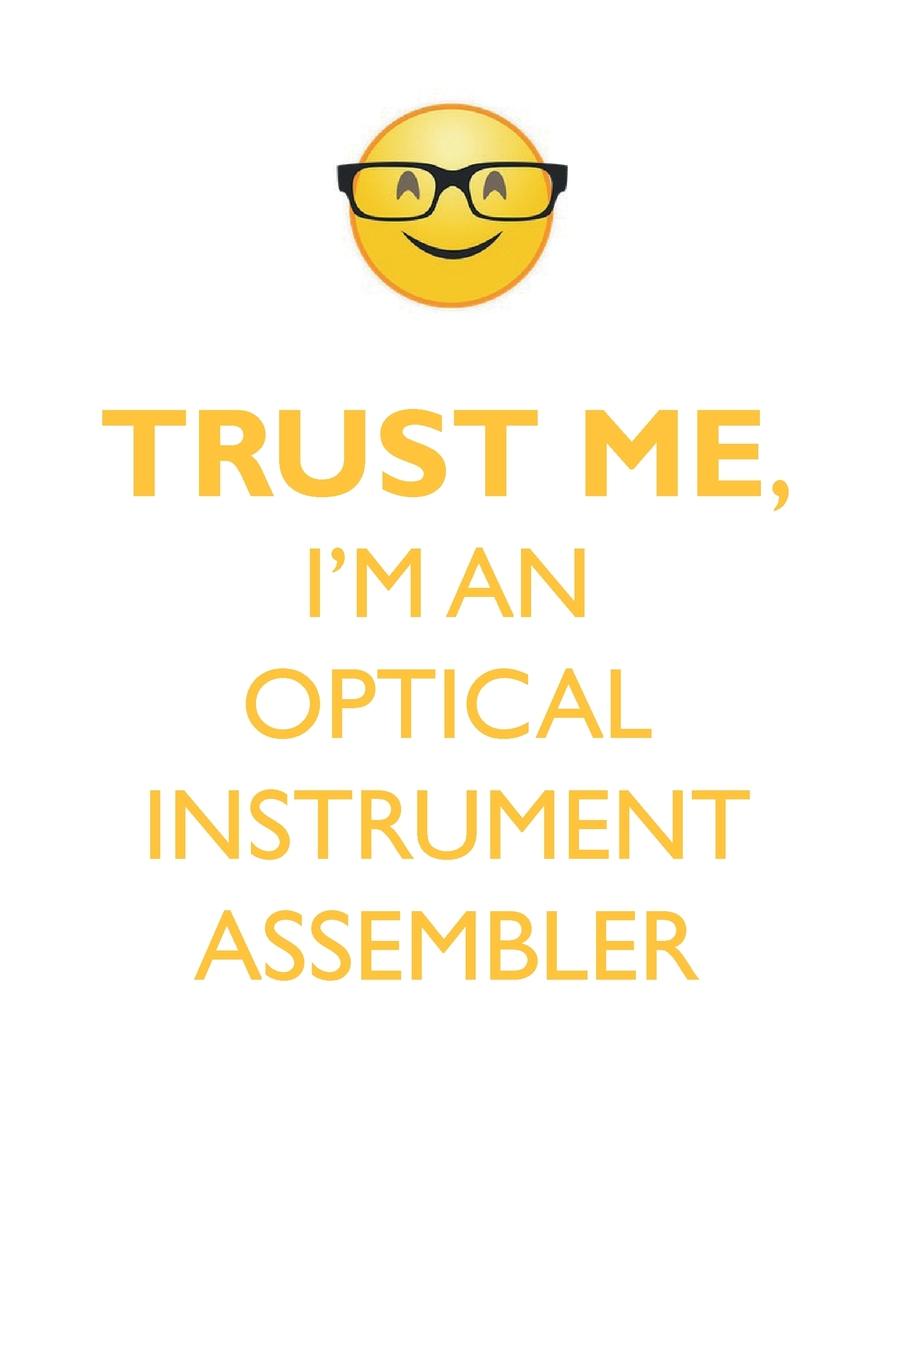 TRUST ME, I`M AN OPTICAL INSTRUMENT ASSEMBLER AFFIRMATIONS WORKBOOK Positive Affirmations Workbook. Includes. Mentoring Questions, Guidance, Supporting You.